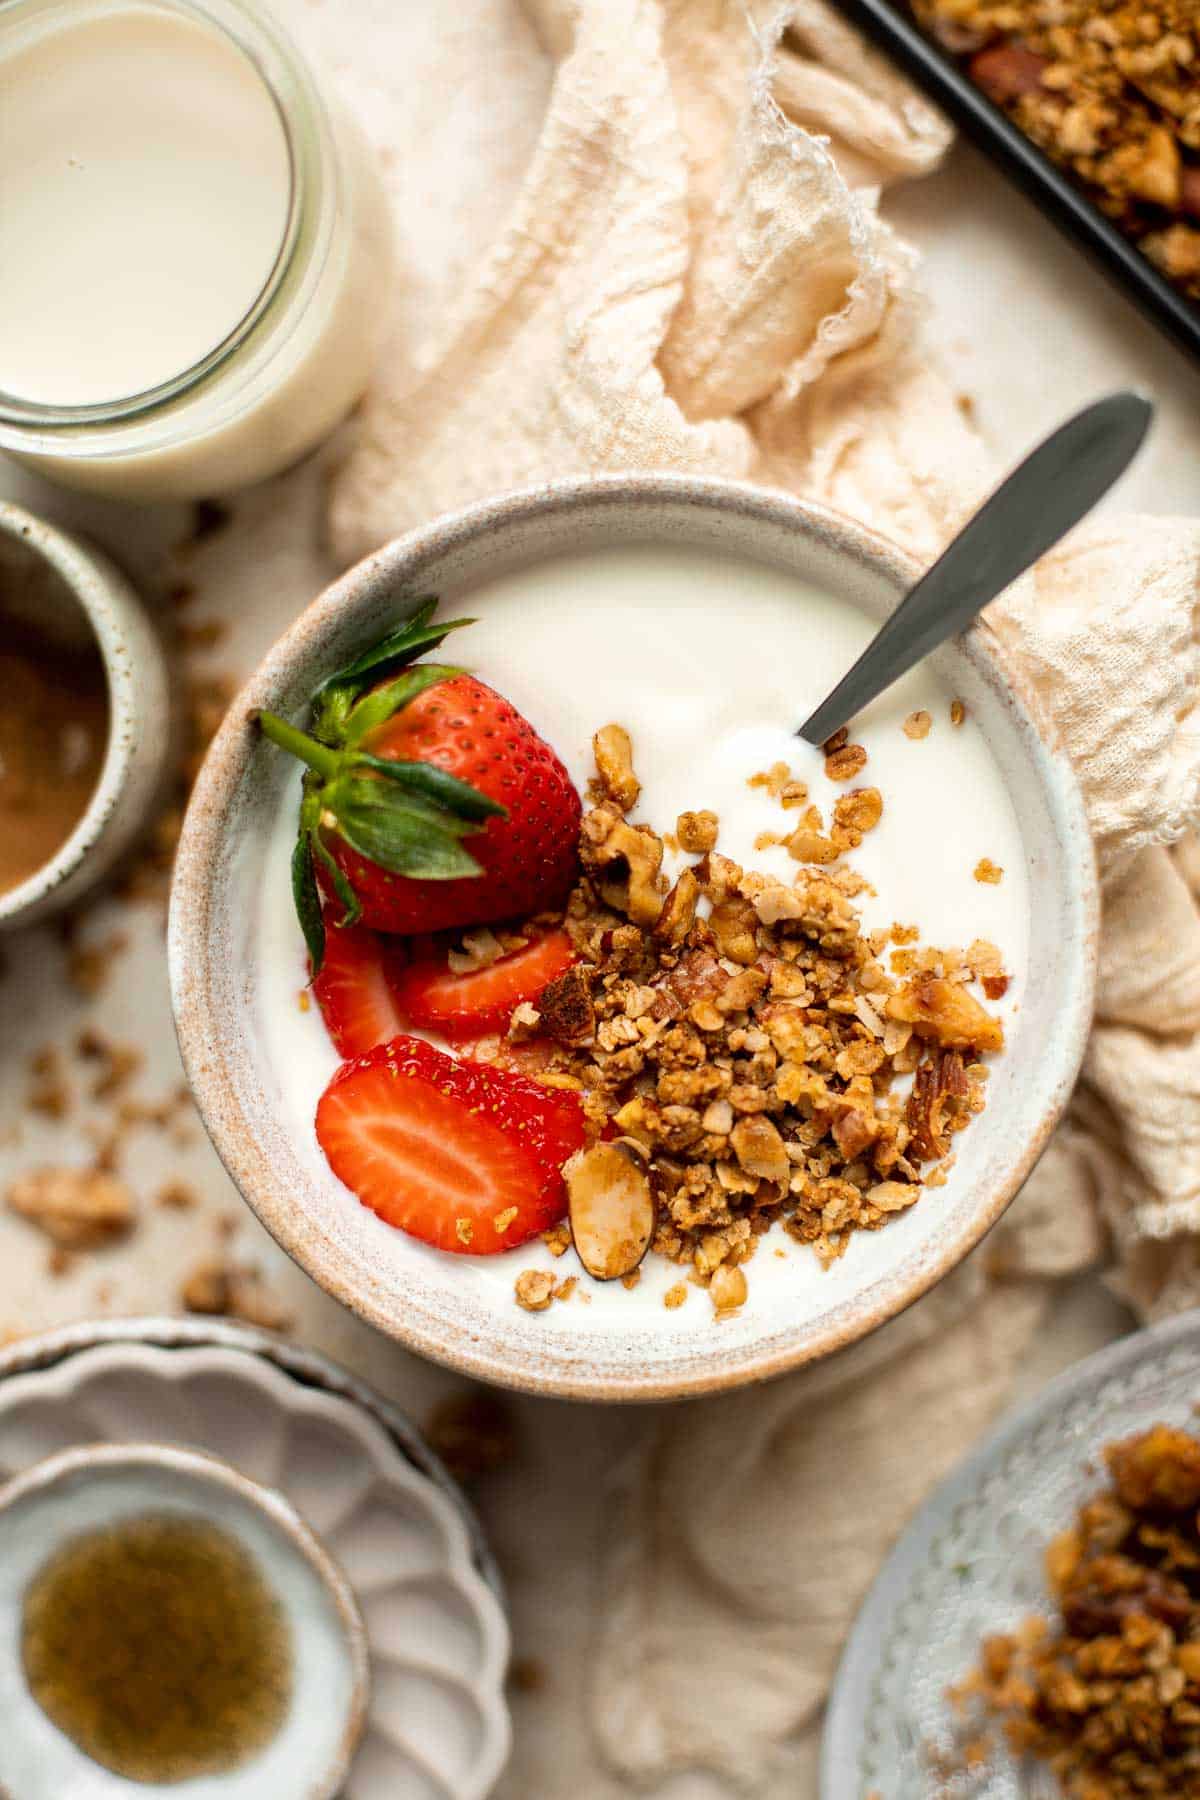 Coconut Maple Walnut Granola is easy to make from scratch with simple ingredients including 3 types of nuts. It's gluten-free, vegan and refined sugar-free! | aheadofthyme.com